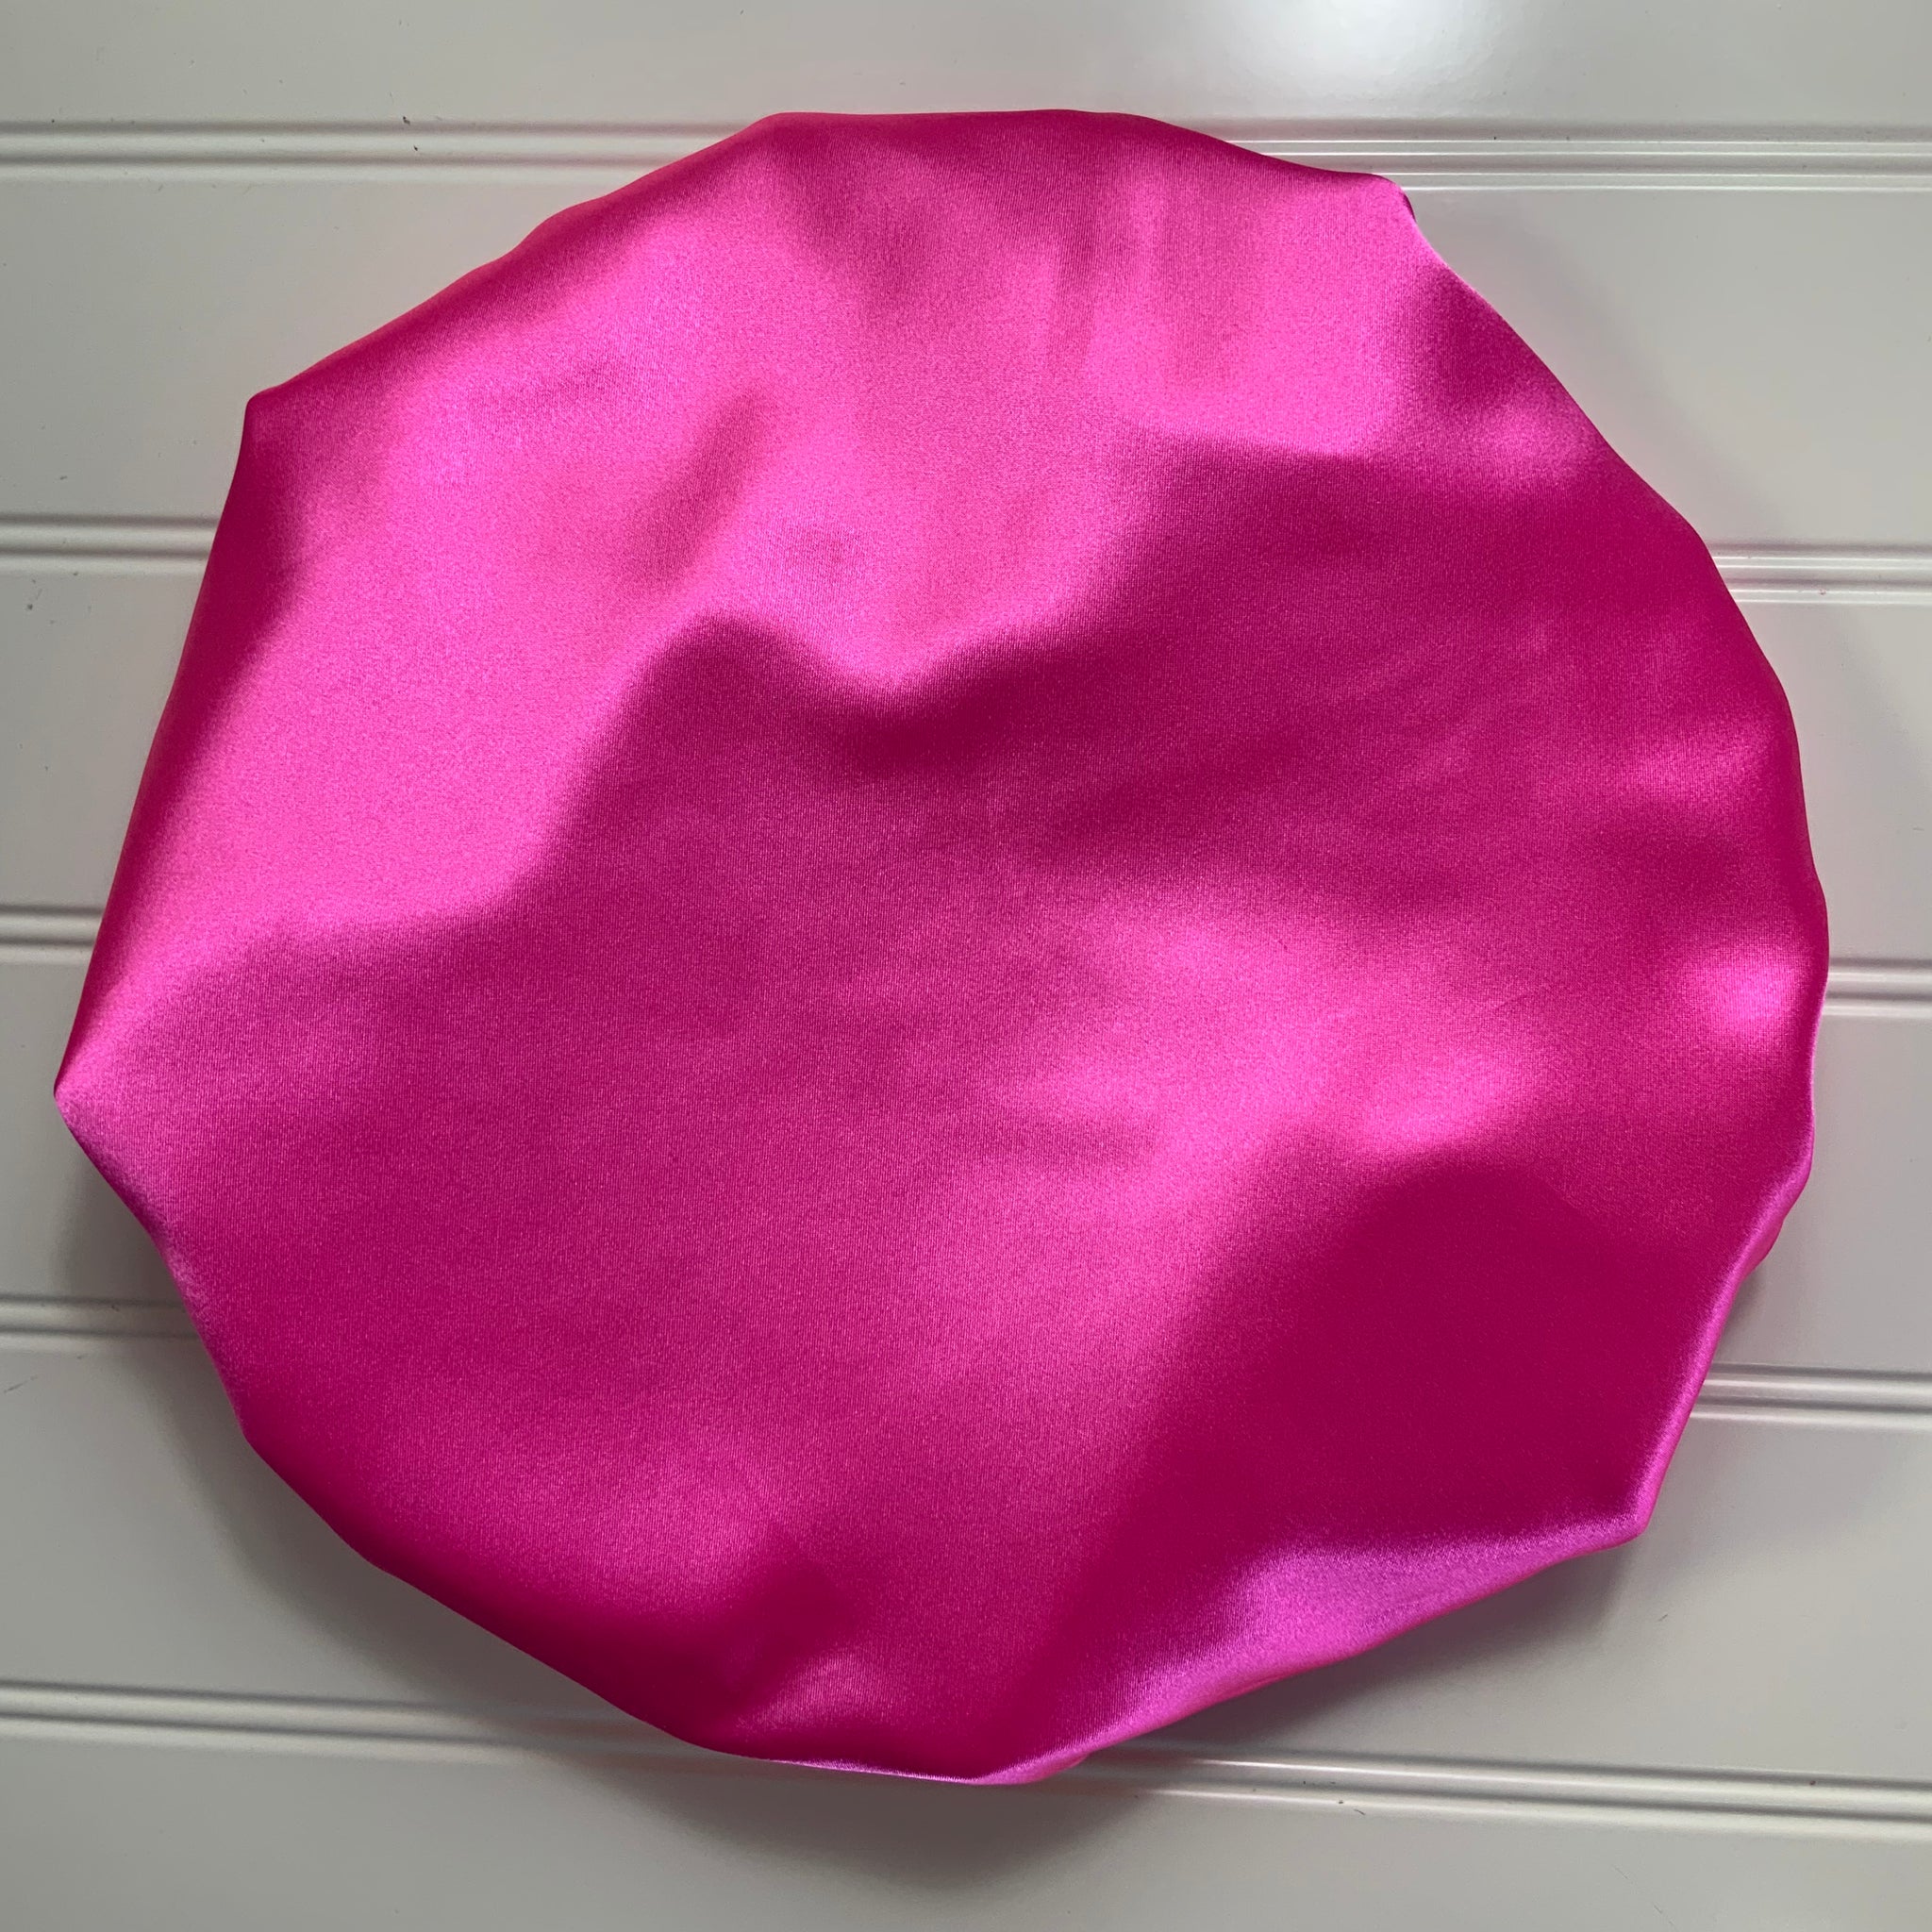 Foxes on Pink Plush Satin Lined Bonnet Electric Pink